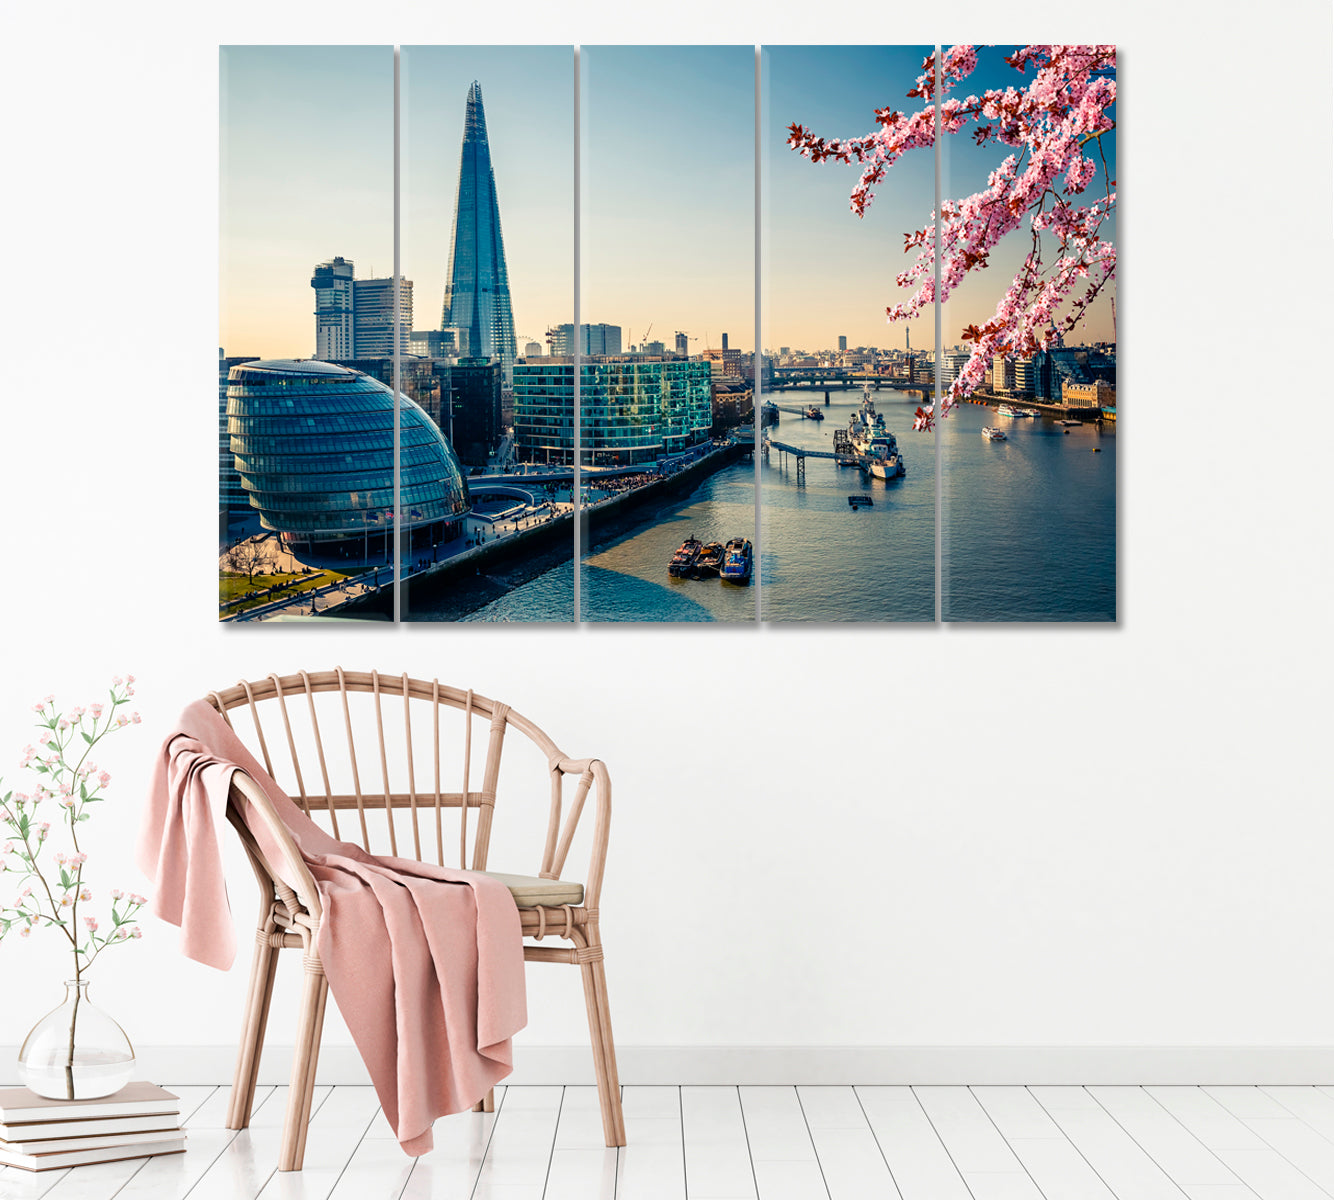 London Cityscape in Spring Canvas Print ArtLexy 5 Panels 36"x24" inches 